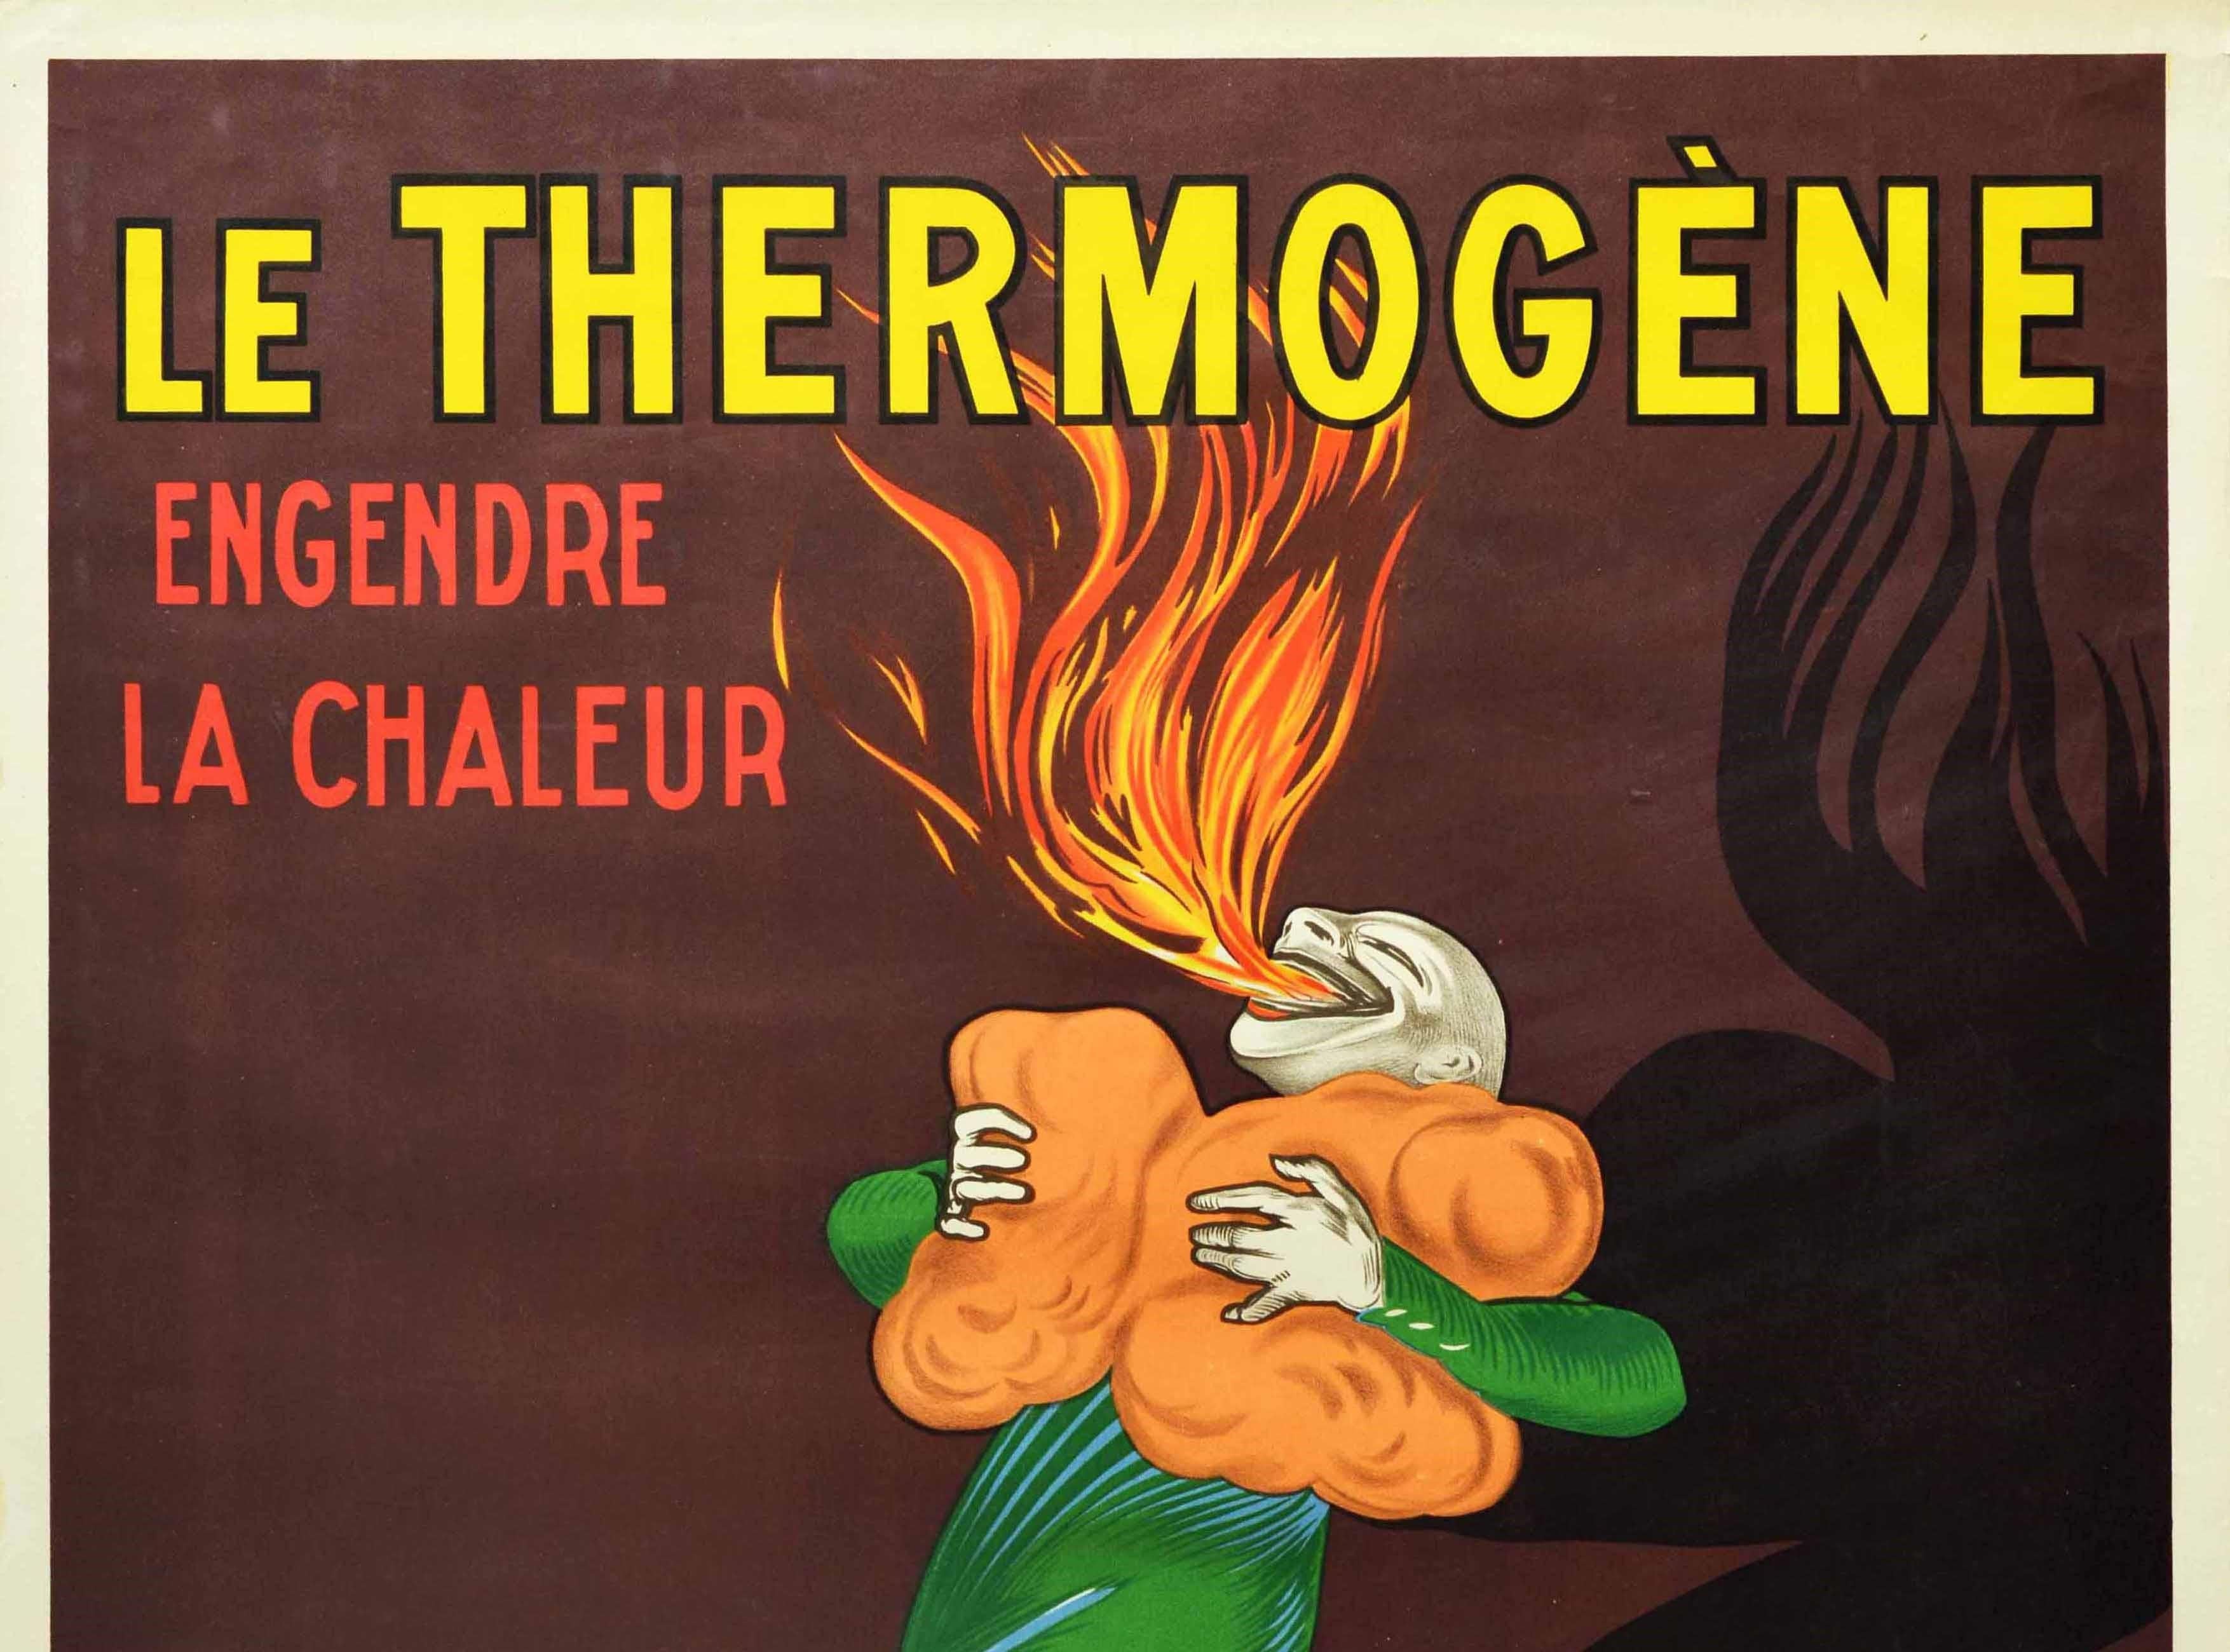 Original vintage advertising poster by the renowned poster artist Leonetto Cappiello (1875-1942): Le Thermogene engendre la chaleur et combat toux, rhumatismes, points do cotes / Thermogene pads that generate heat to fight coughs and rheumatism.